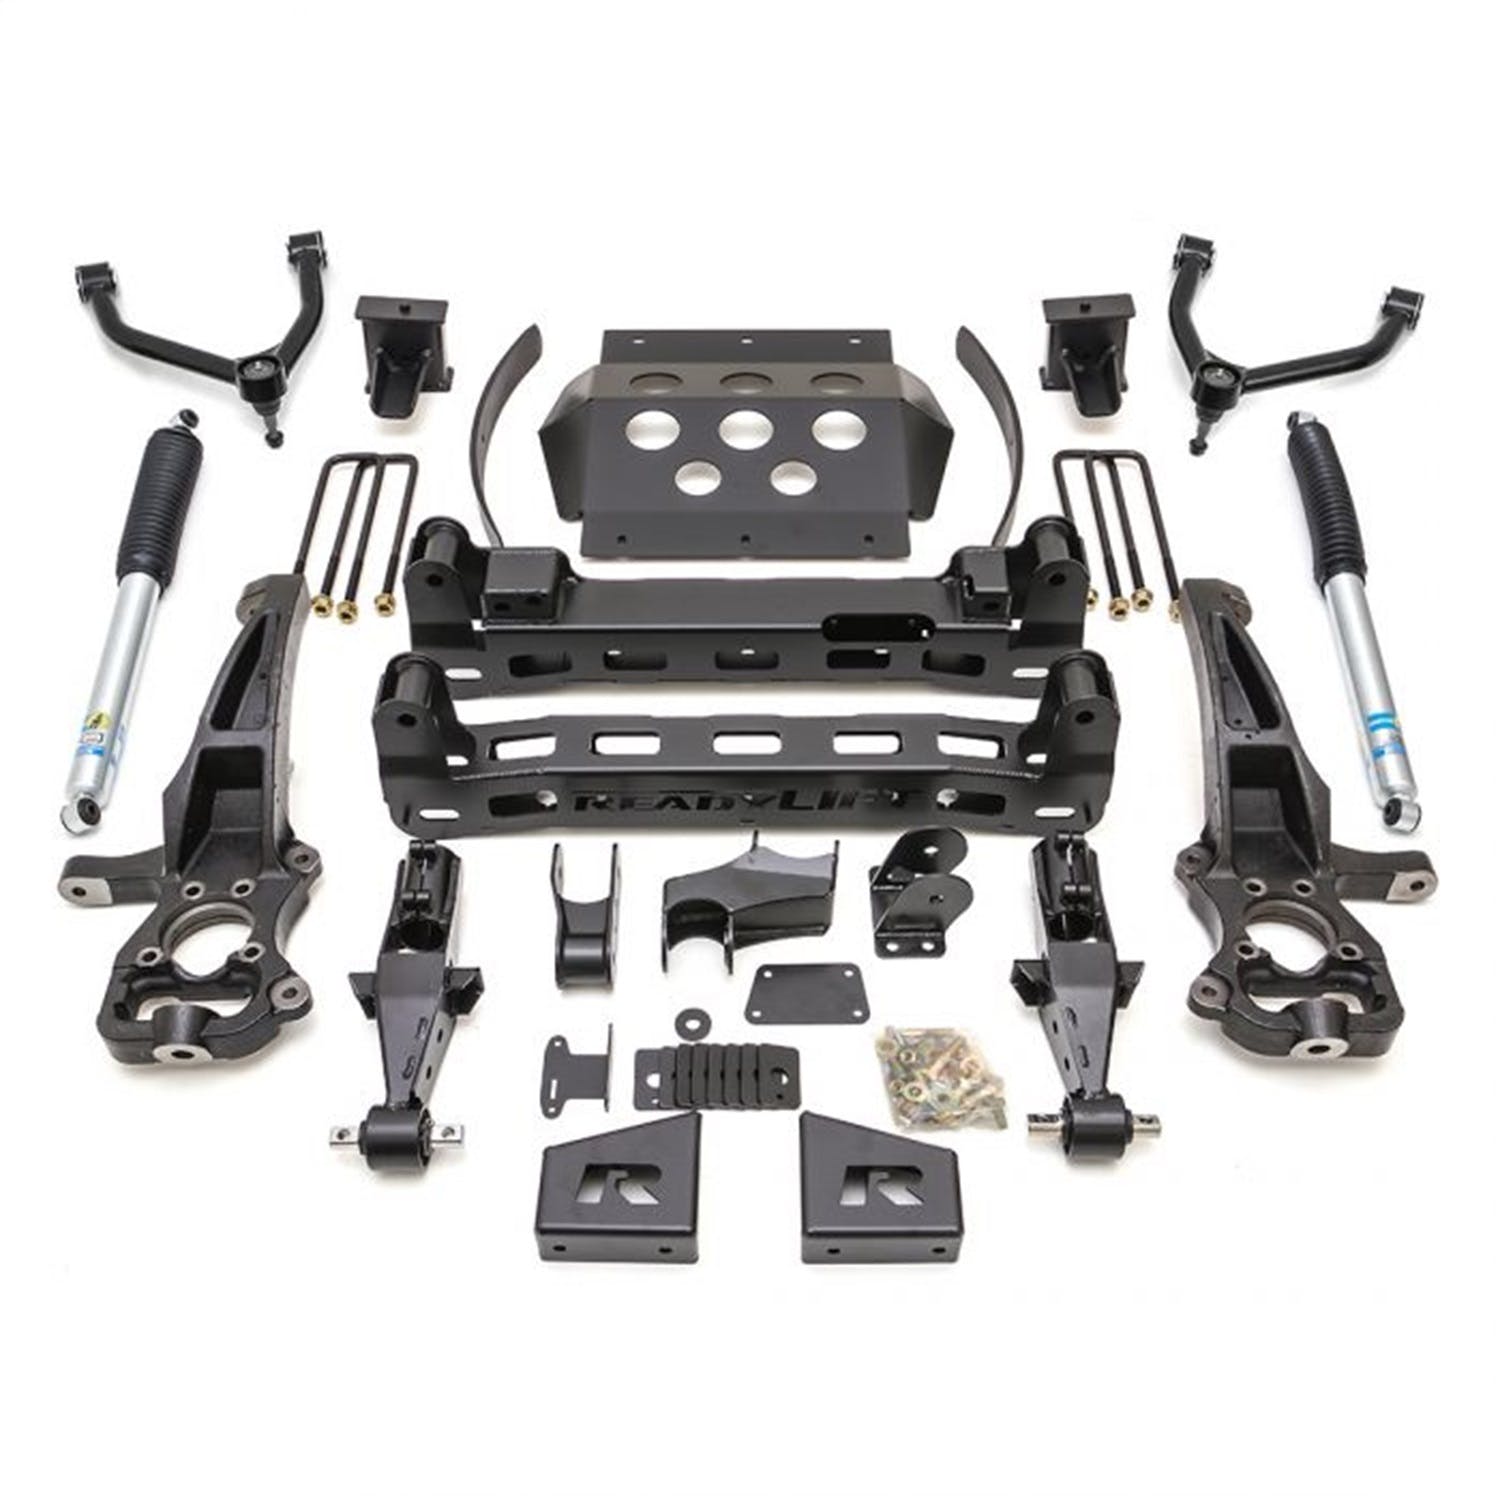 ReadyLIFT 44-3980 8" Big Lift Kit with Upper Control Arms and rear Bilstein Shocks